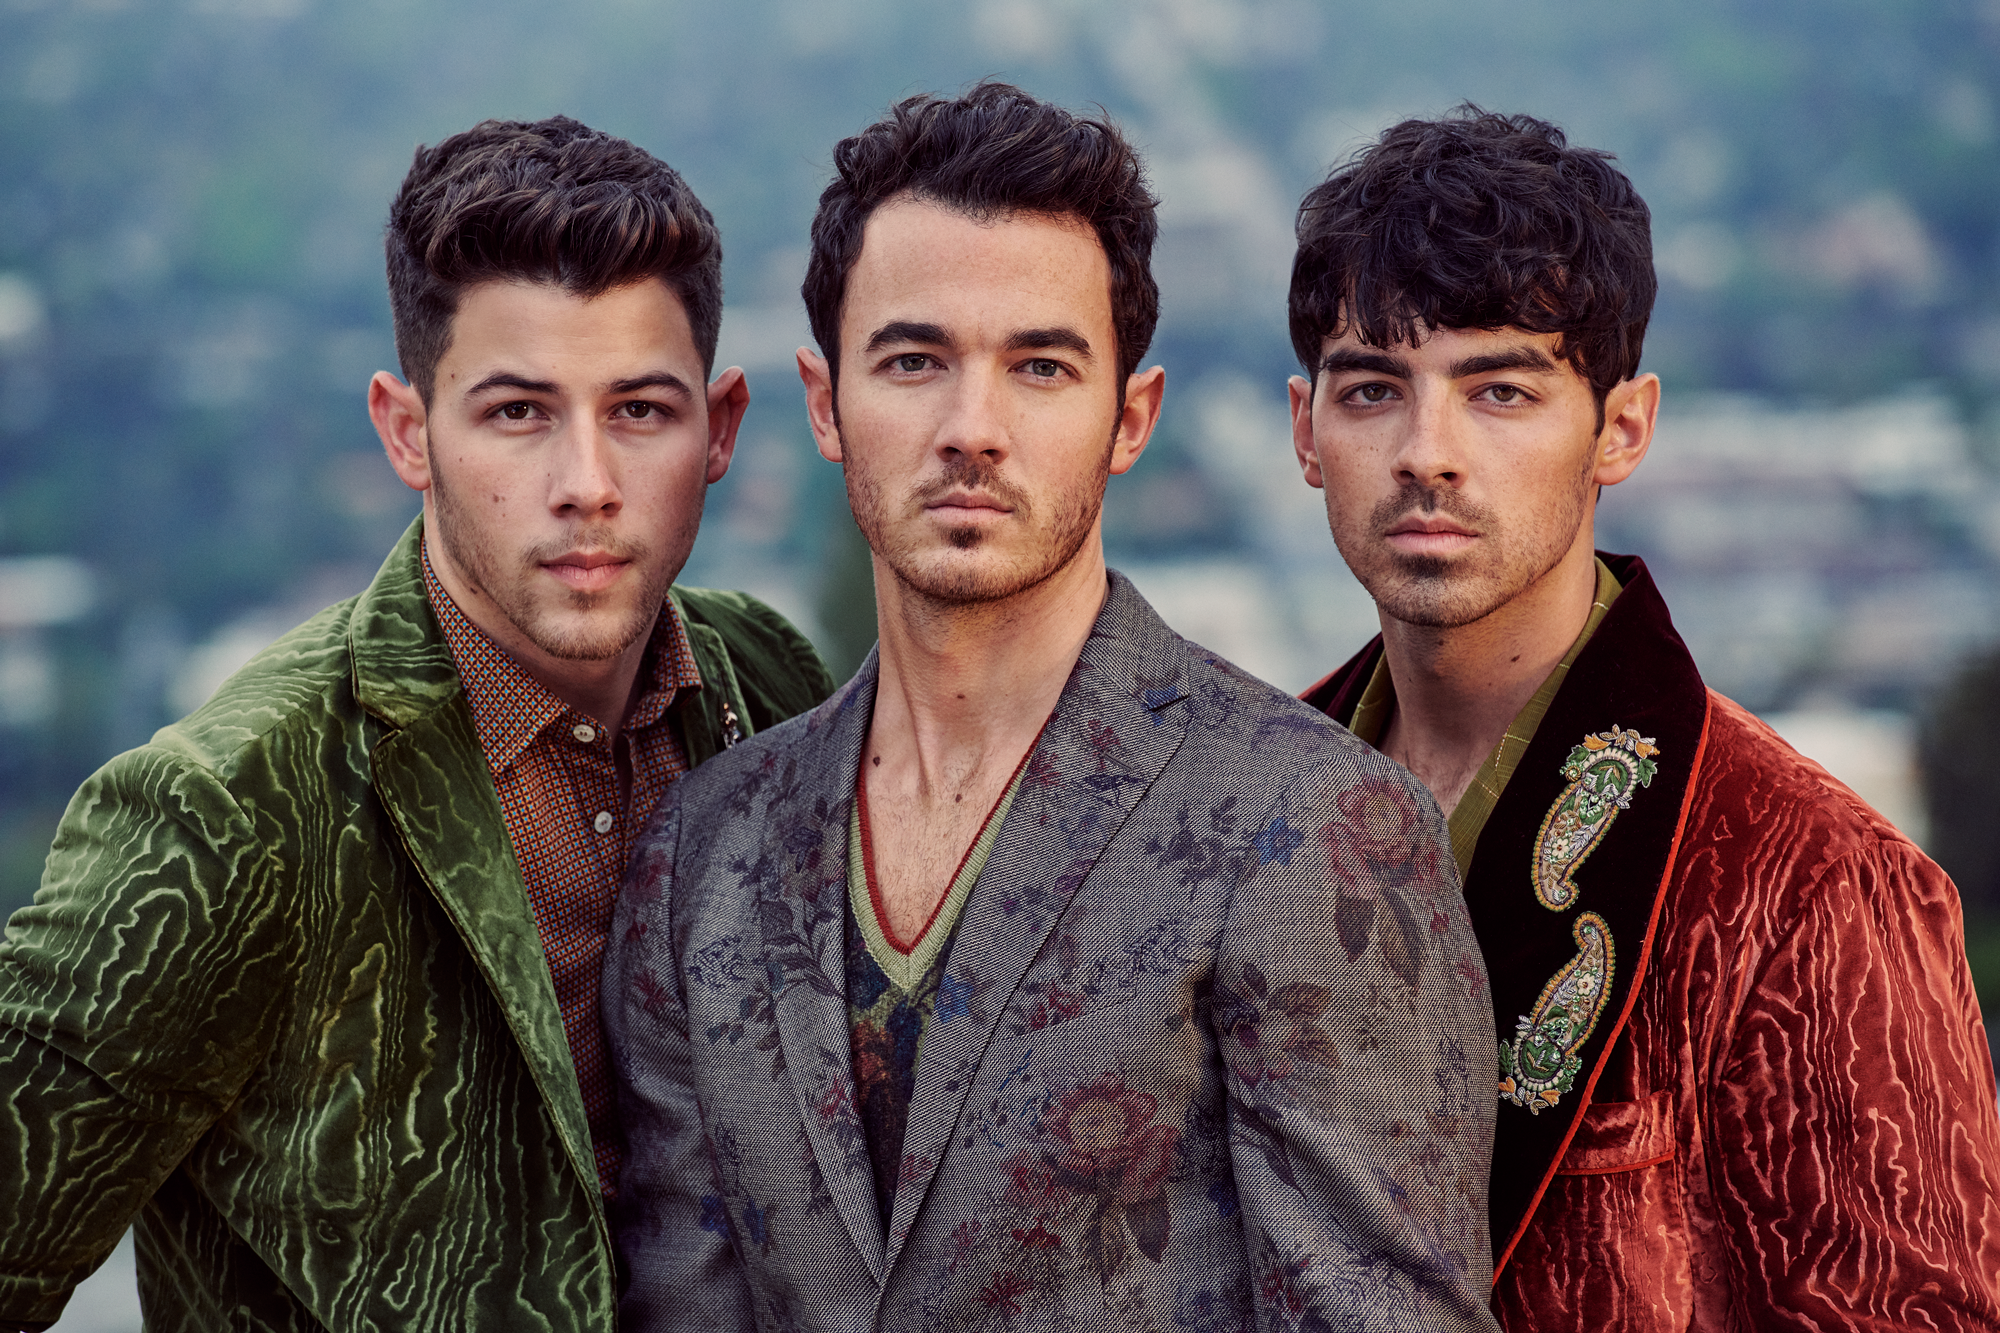 Jonas Brothers Tell All About The Band's Breakup and Reunion